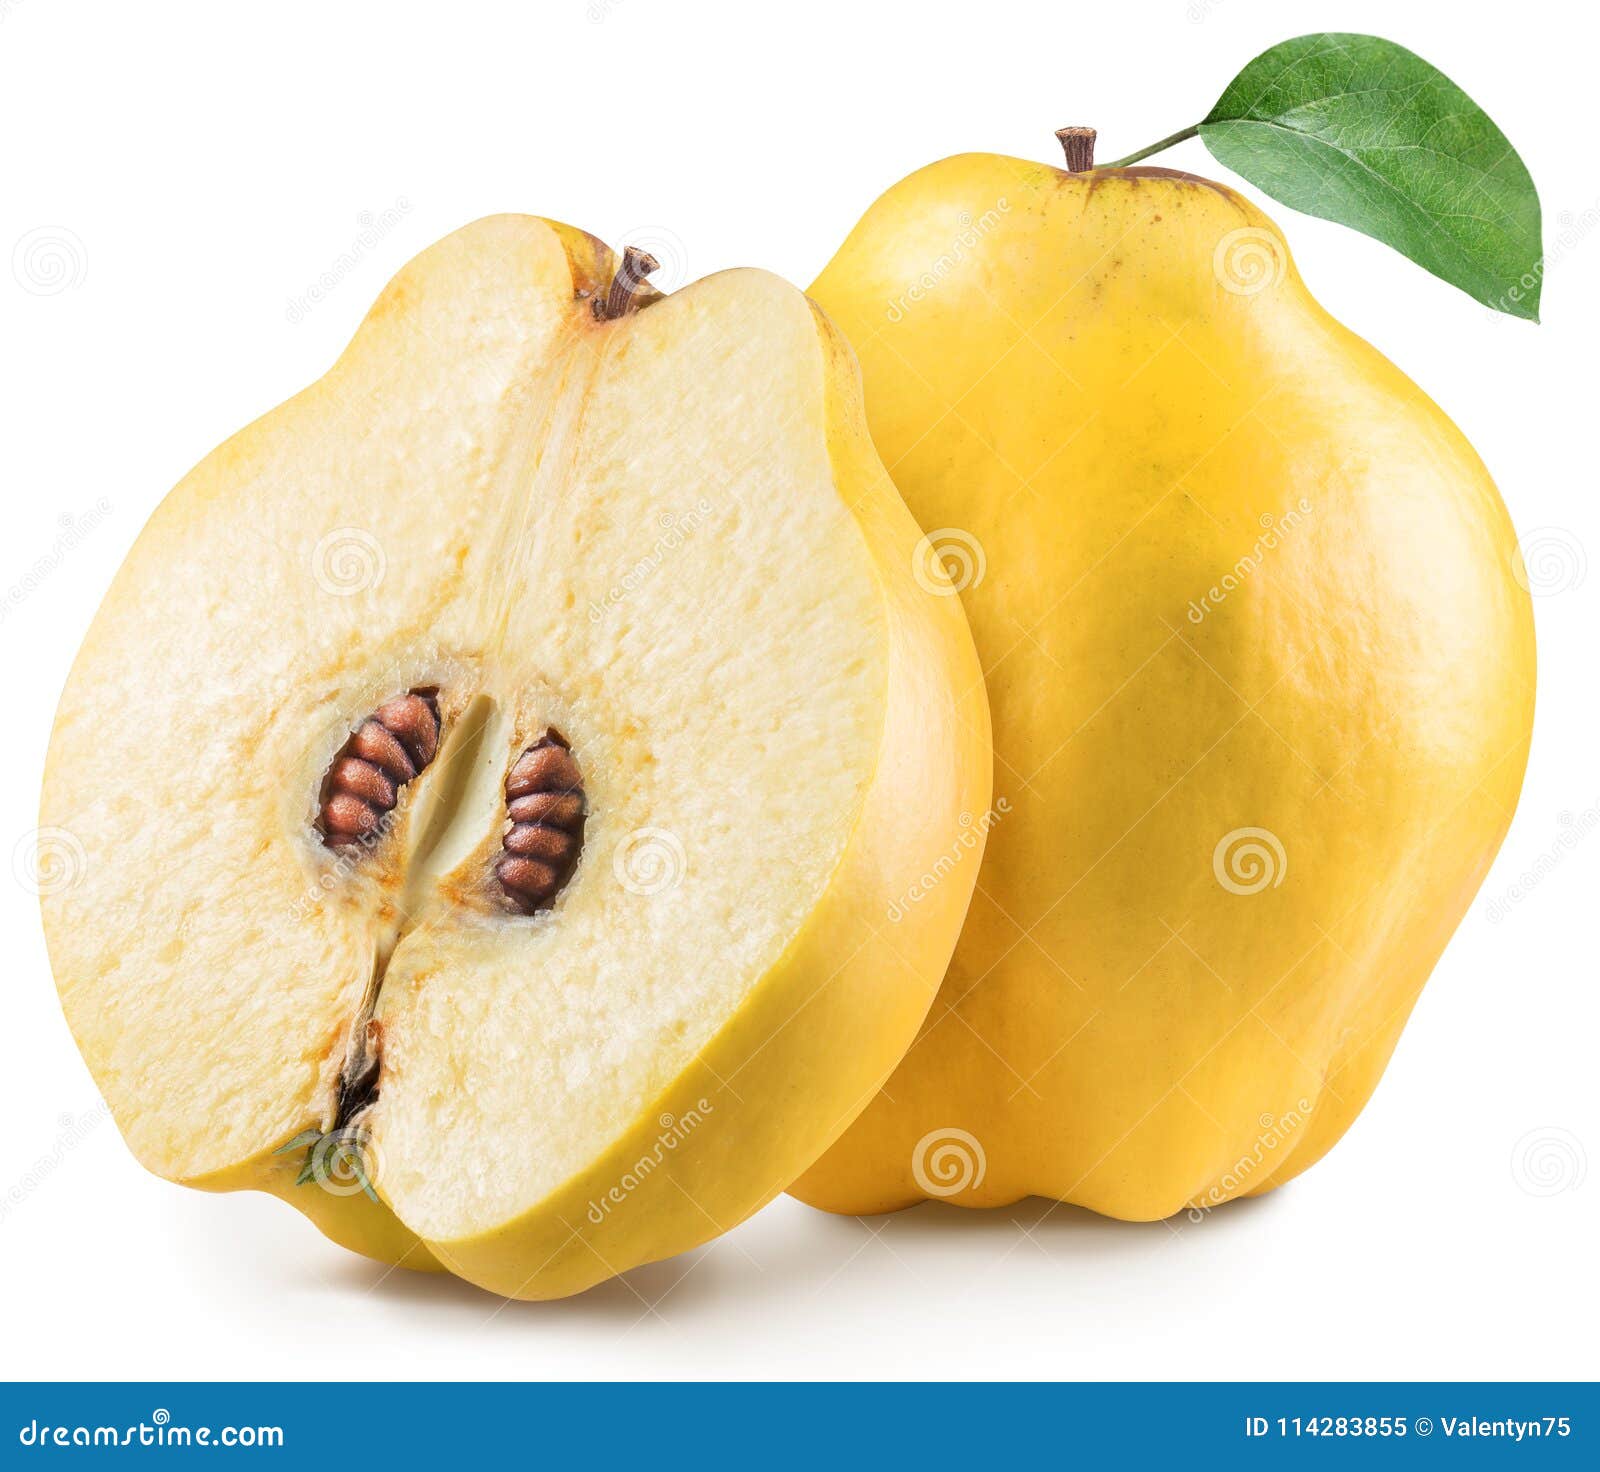 apple-quince with leaf. file contains clipping path.